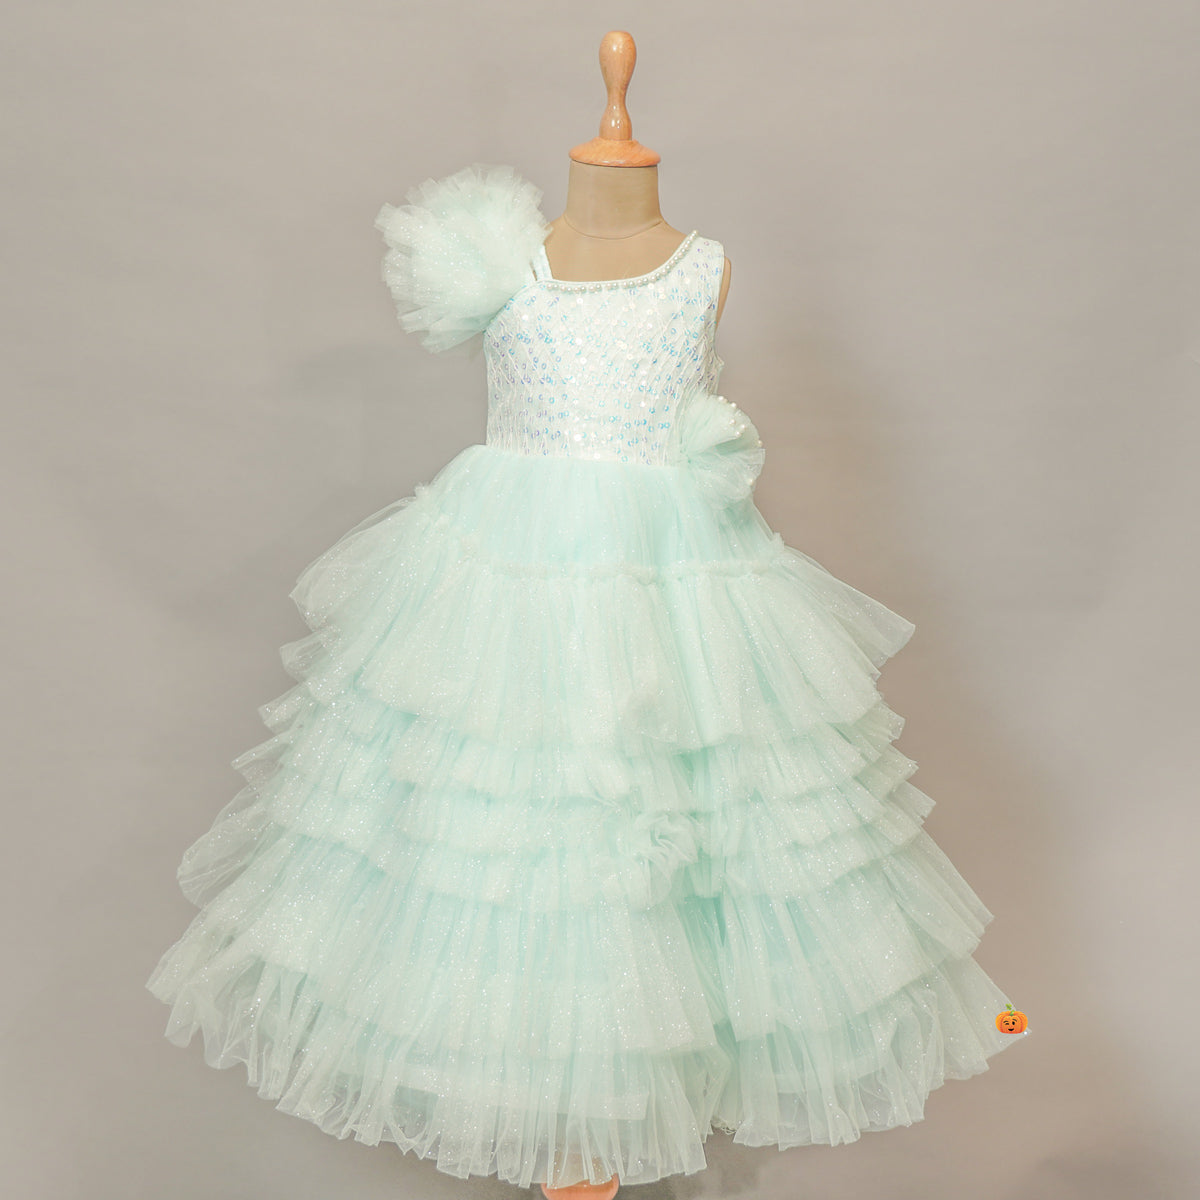 2 To 3 Years Baby Girl Dress - Buy 2 To 3 Years Baby Girl Dress online at  Best Prices in India | Flipkart.com